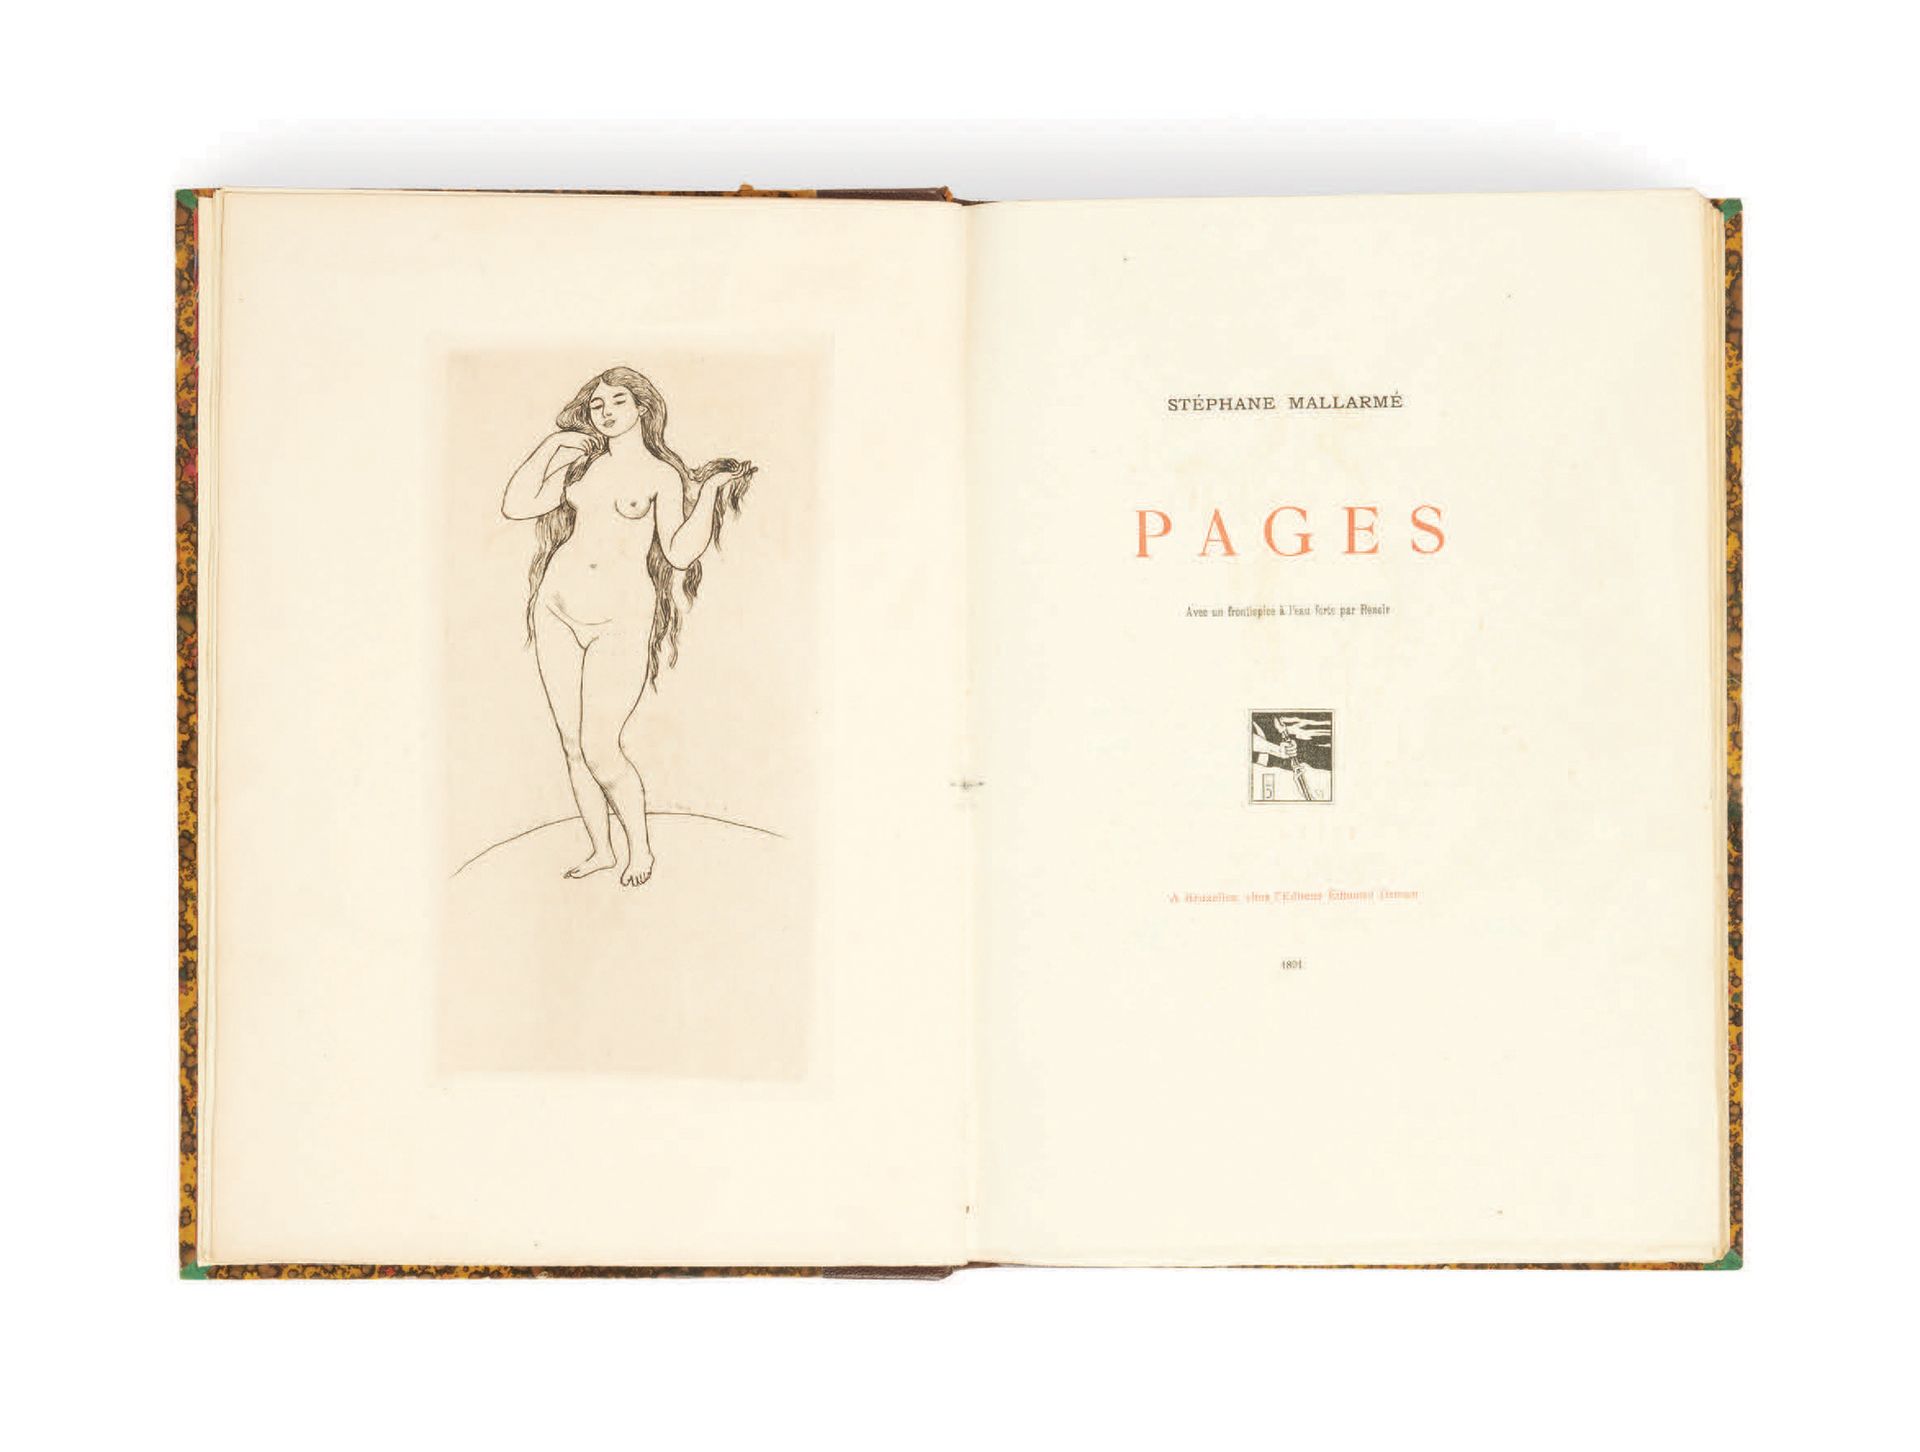 Stéphane MALLARME. Pages. With an etching frontispiece by Renoir. Brussels, Edmo&hellip;